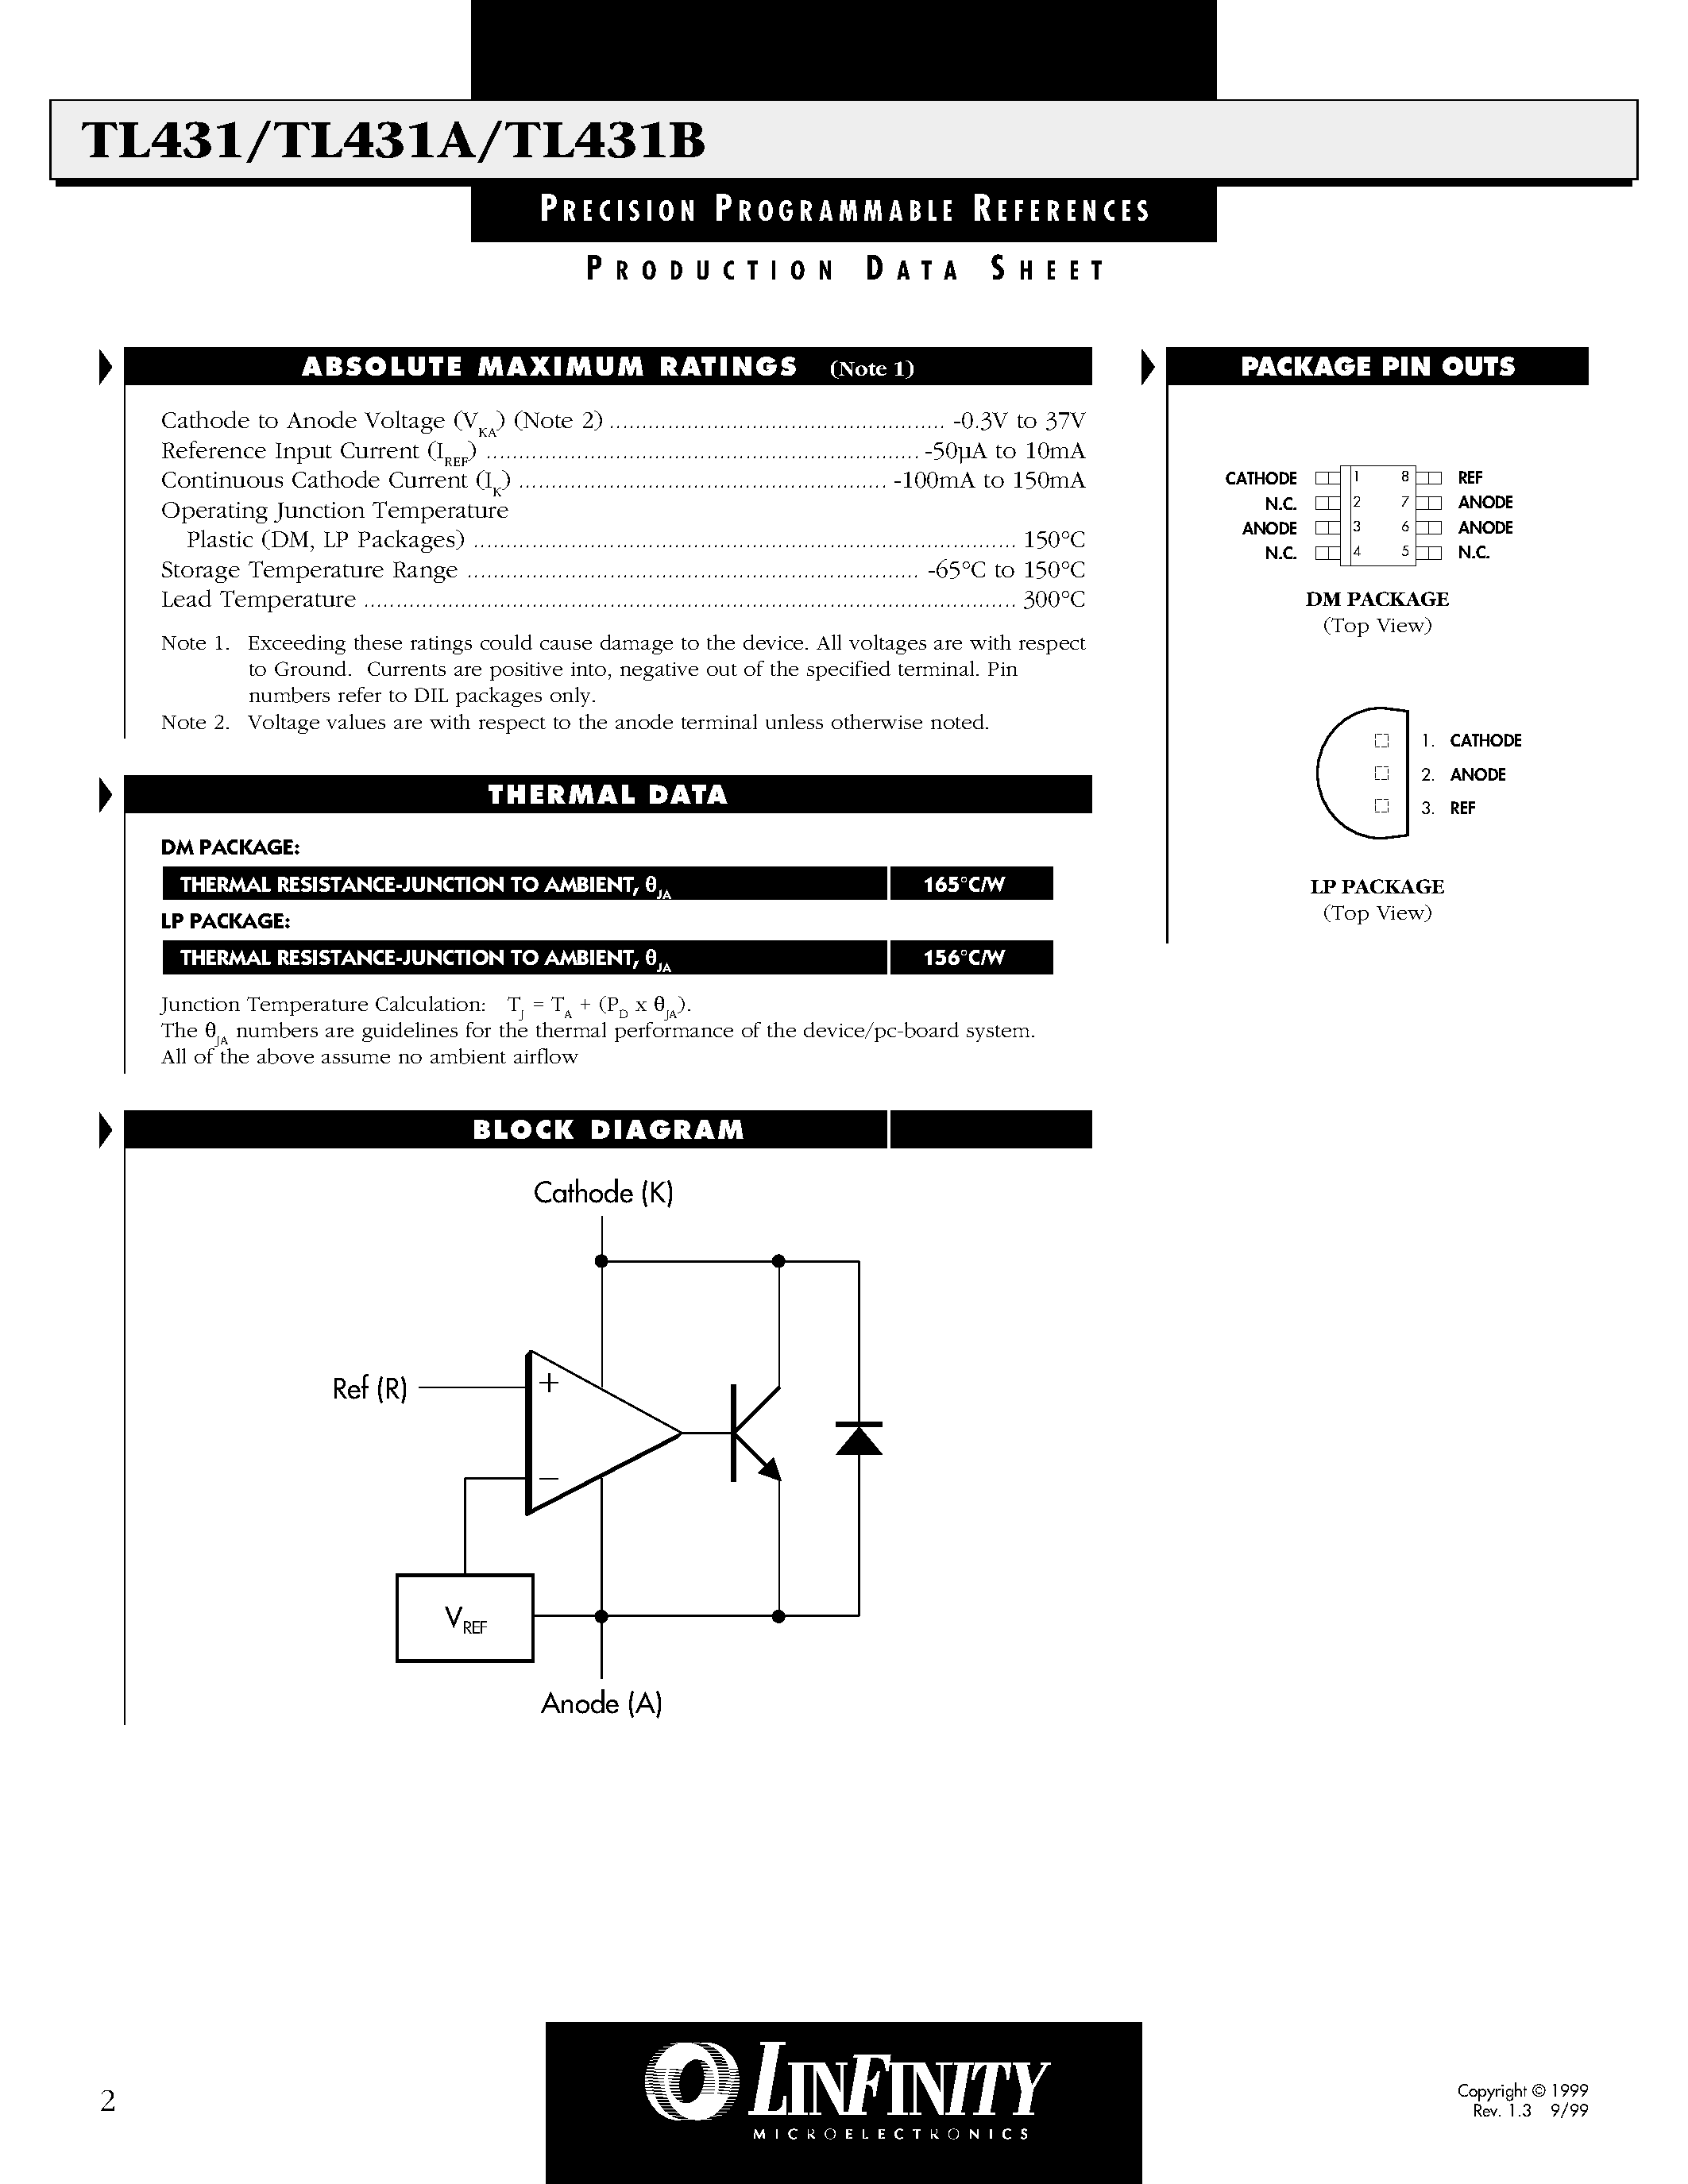 Datasheet TL431 - PRECISION PROGRAMMABLE REFERENCES page 2